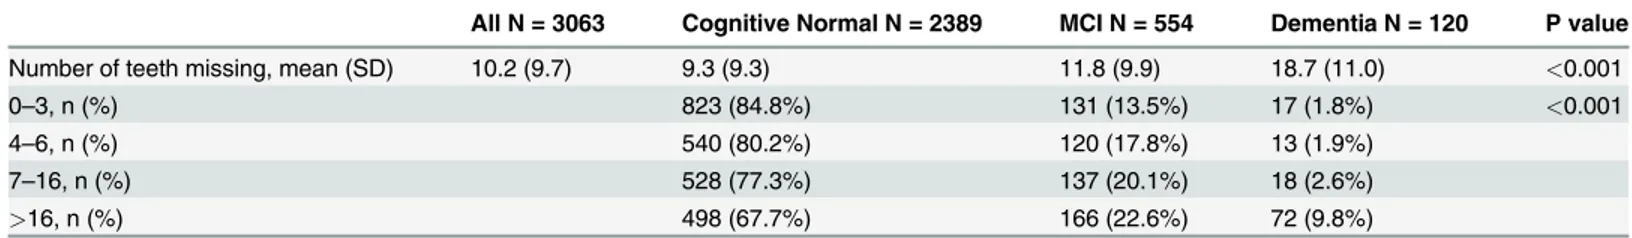 Table 2. Number of teeth missing among participants with different clinical cognitive diagnosis.